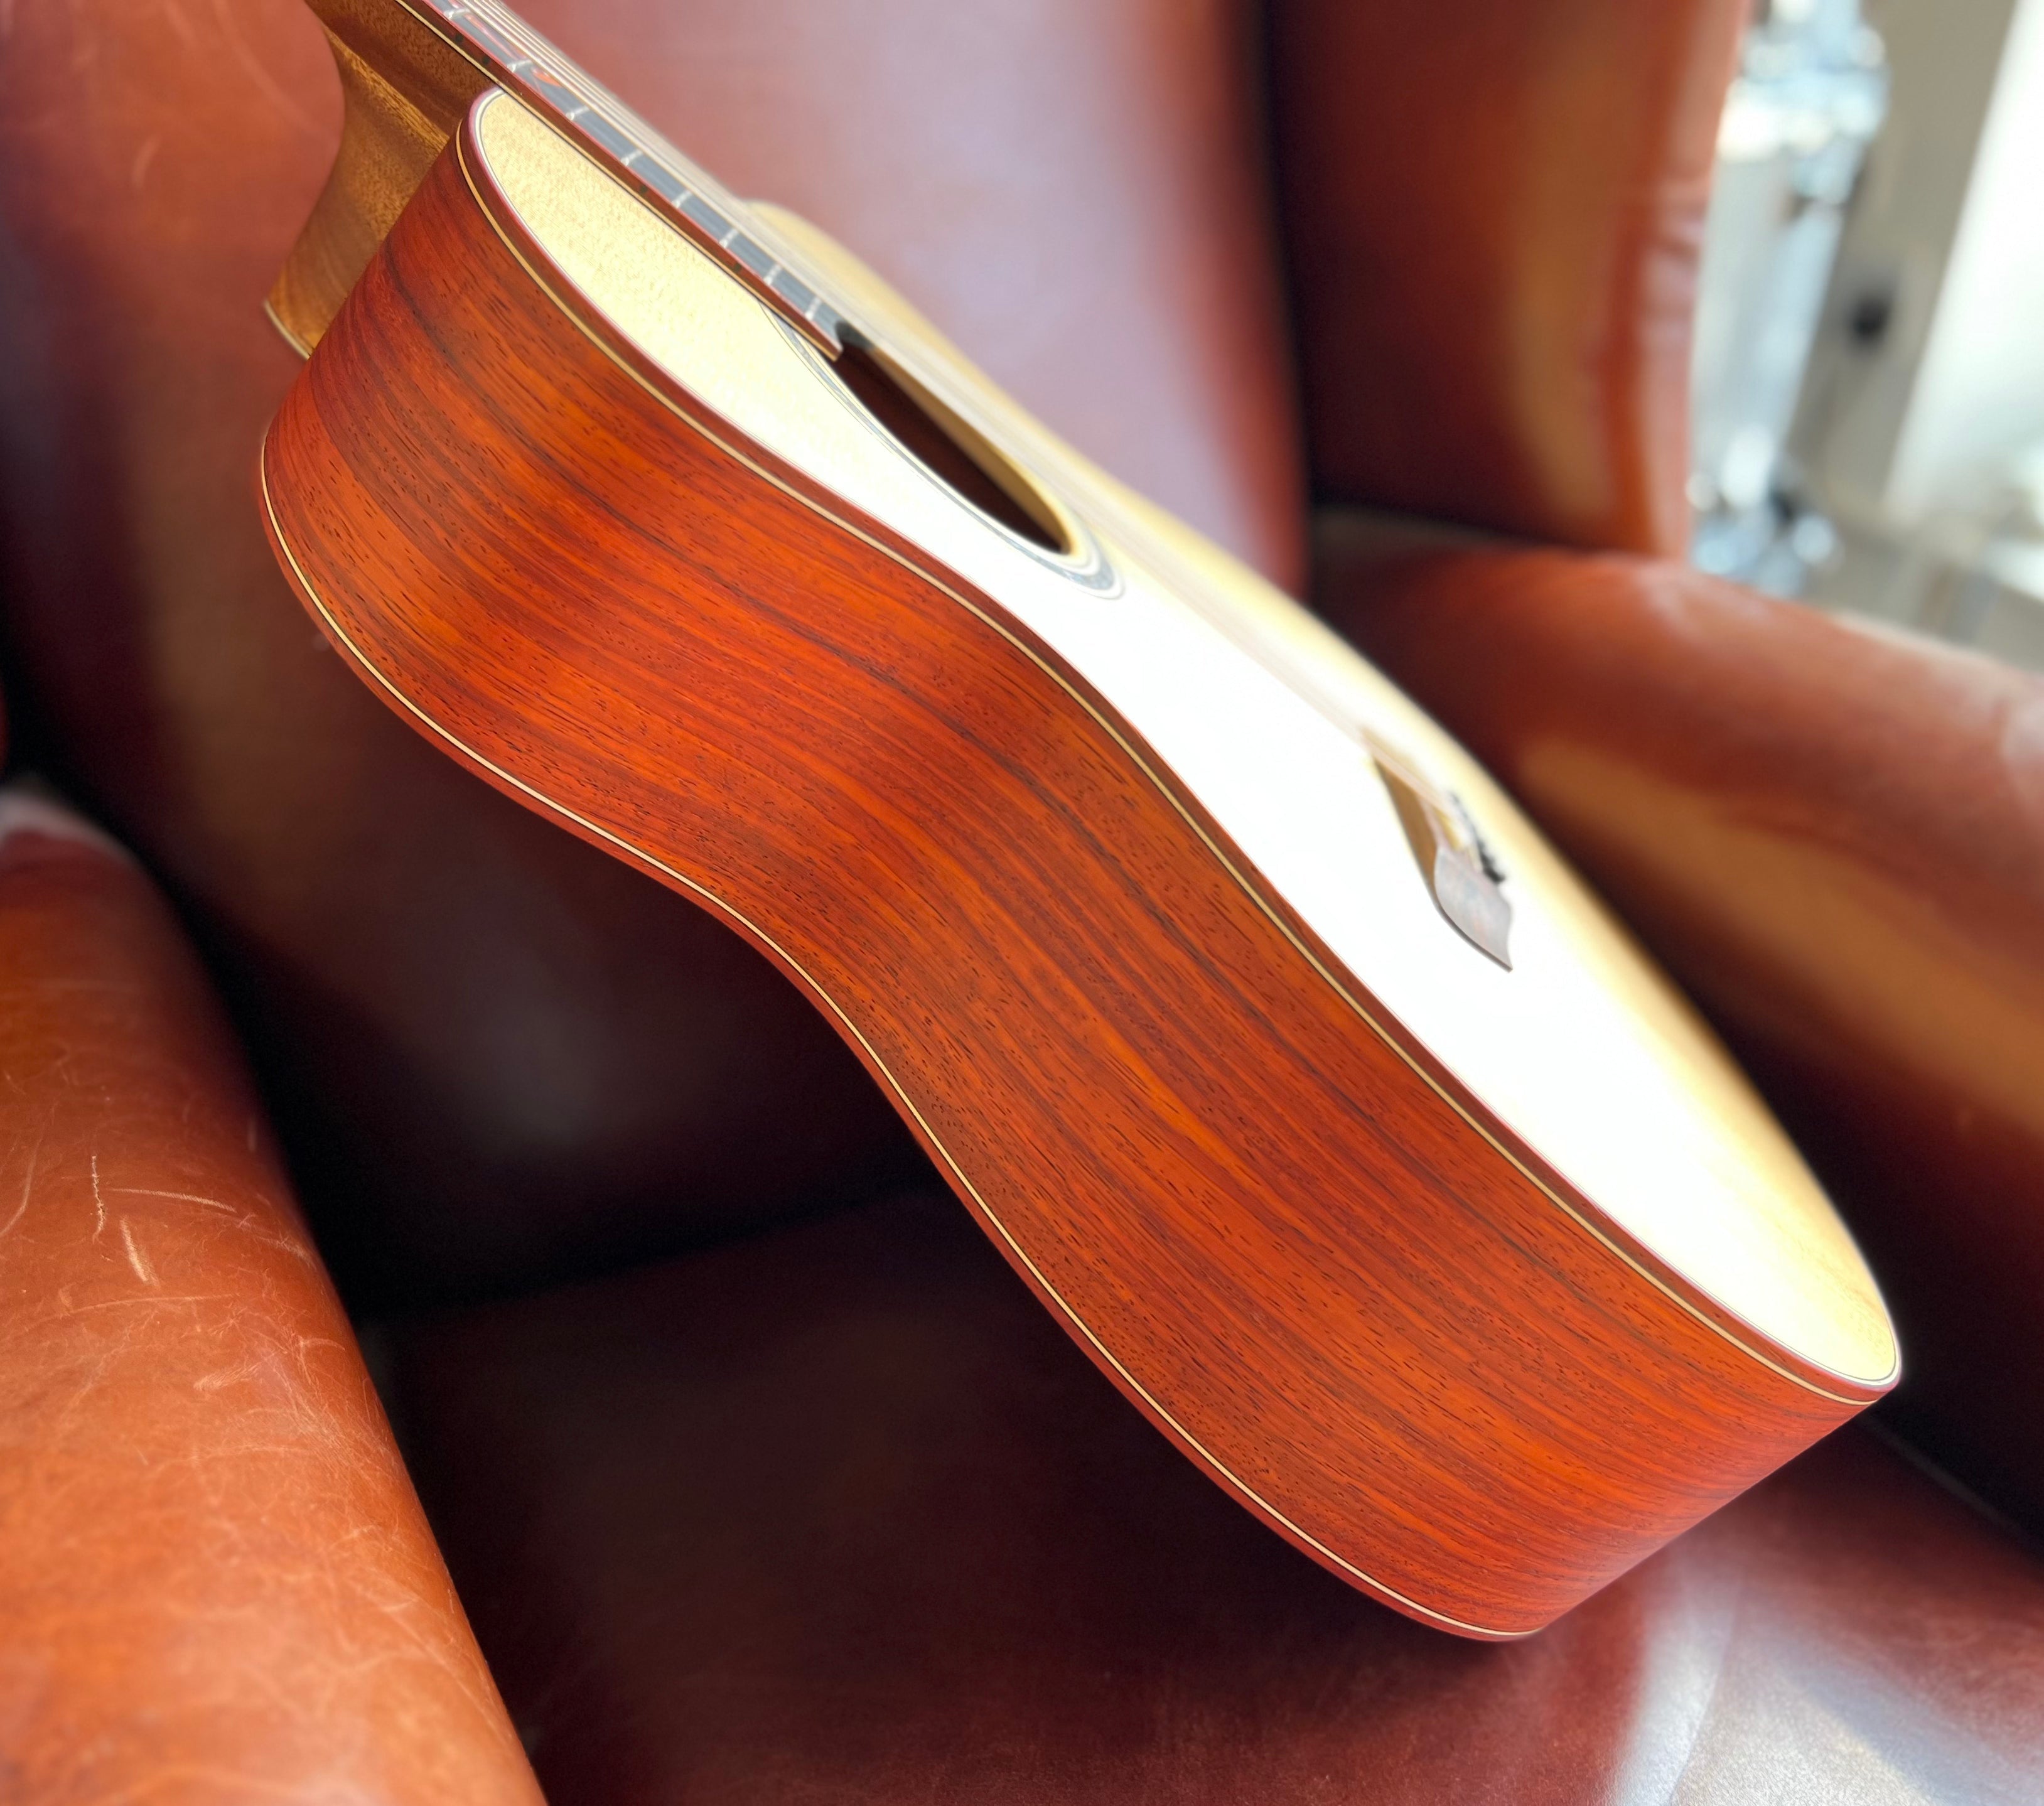 Dowina PADAUK GAC TDS 12 Fret Neck Join  (Thermo Cured Dolomite Spruce), Acoustic Guitar for sale at Richards Guitars.